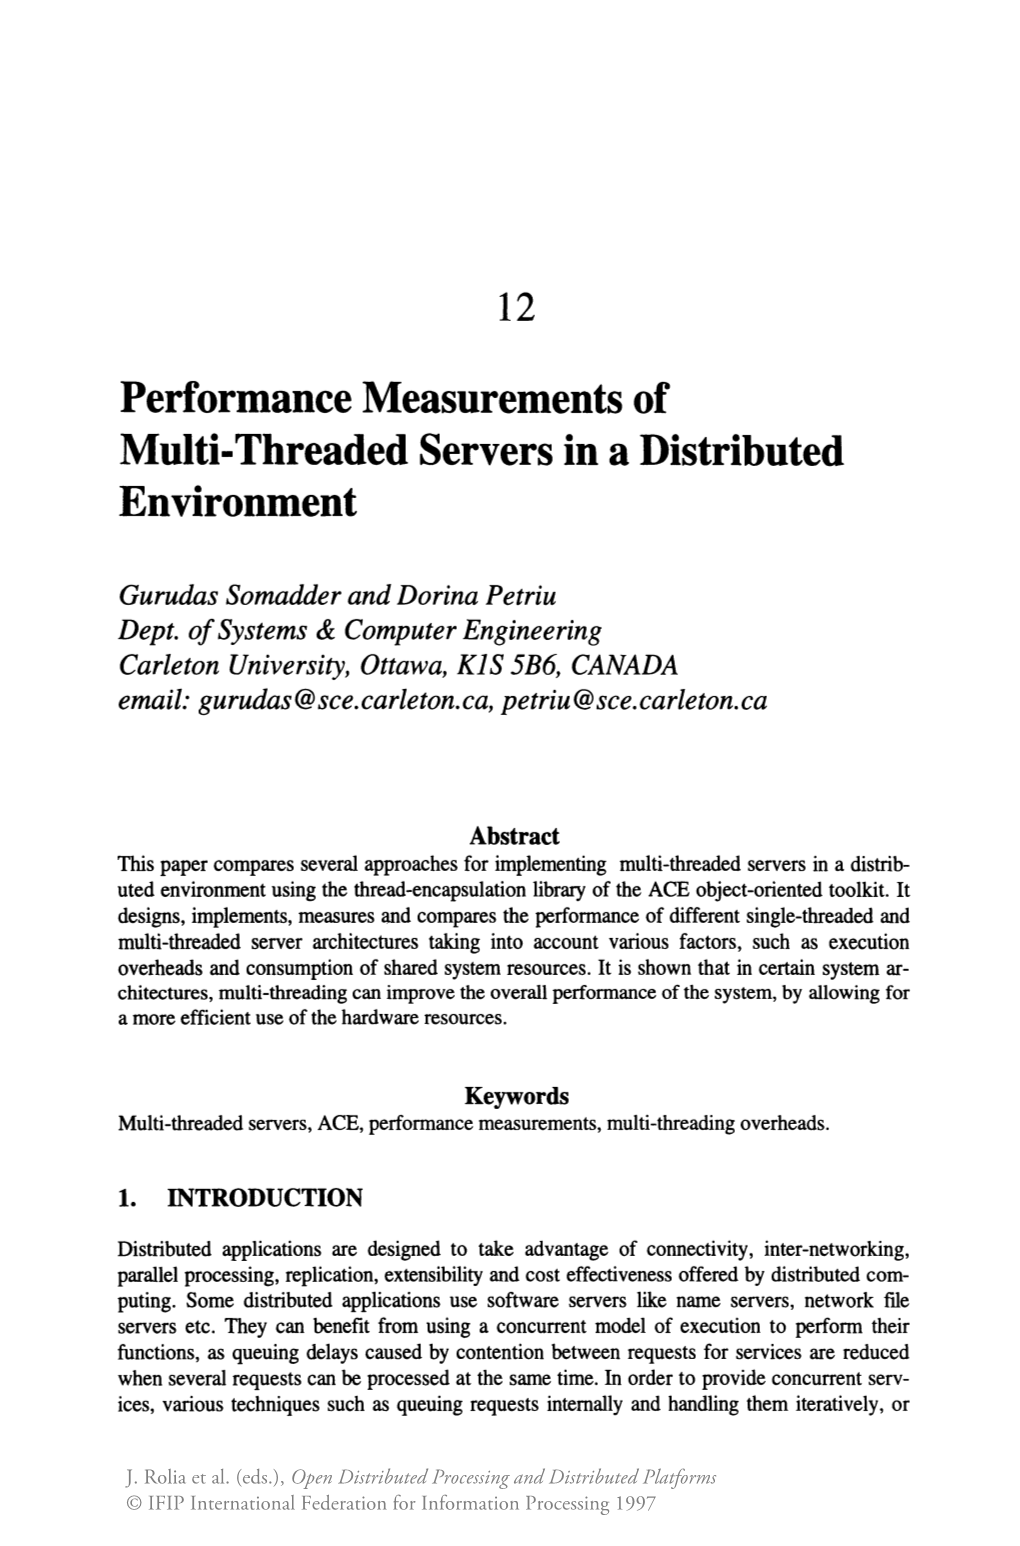 Performance Measurements of Multi-Threaded Servers in a Distributed Environment